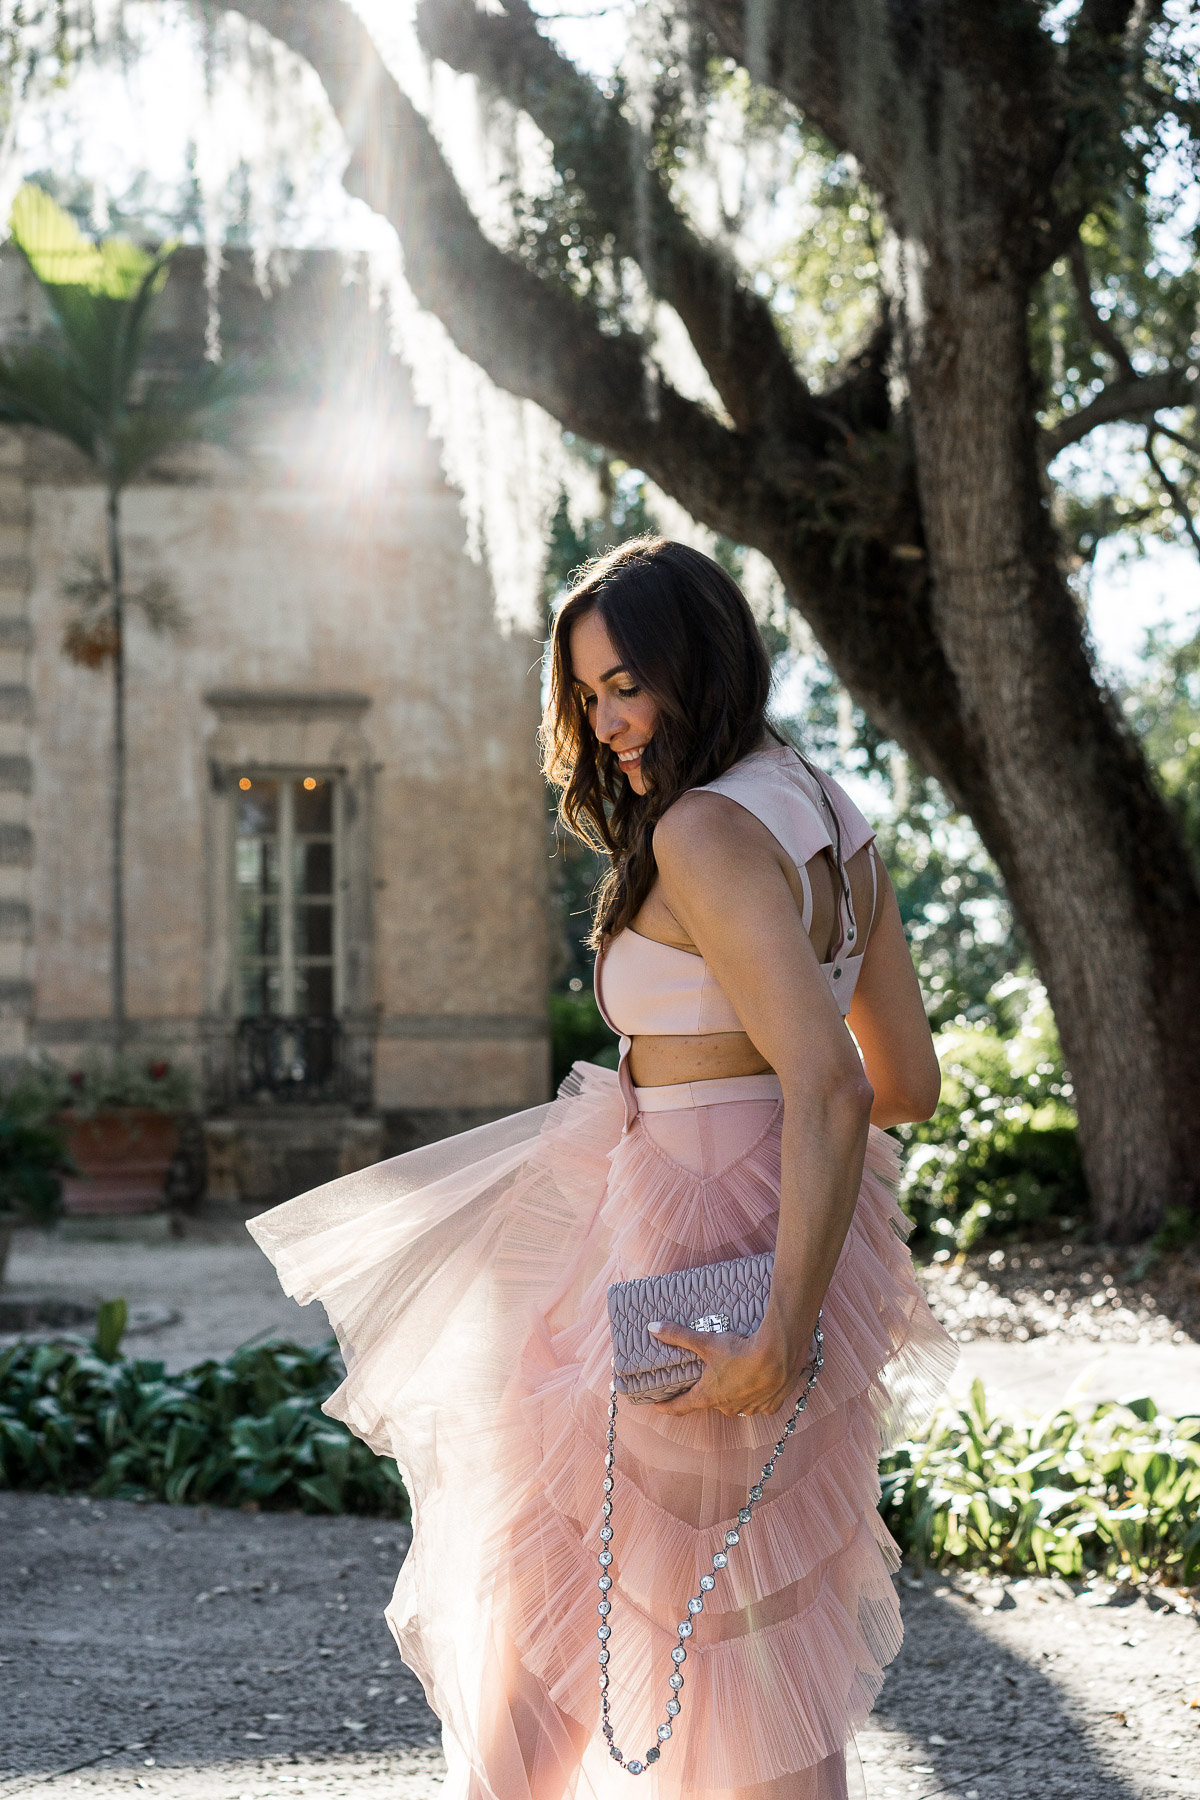 Fashion blogger Amanda from A Glam Lifestyle blog wears gorgeous BCBG Avalon blush tulle dress with Miu Miu bag and Christian Louboutin Pigalle pumps